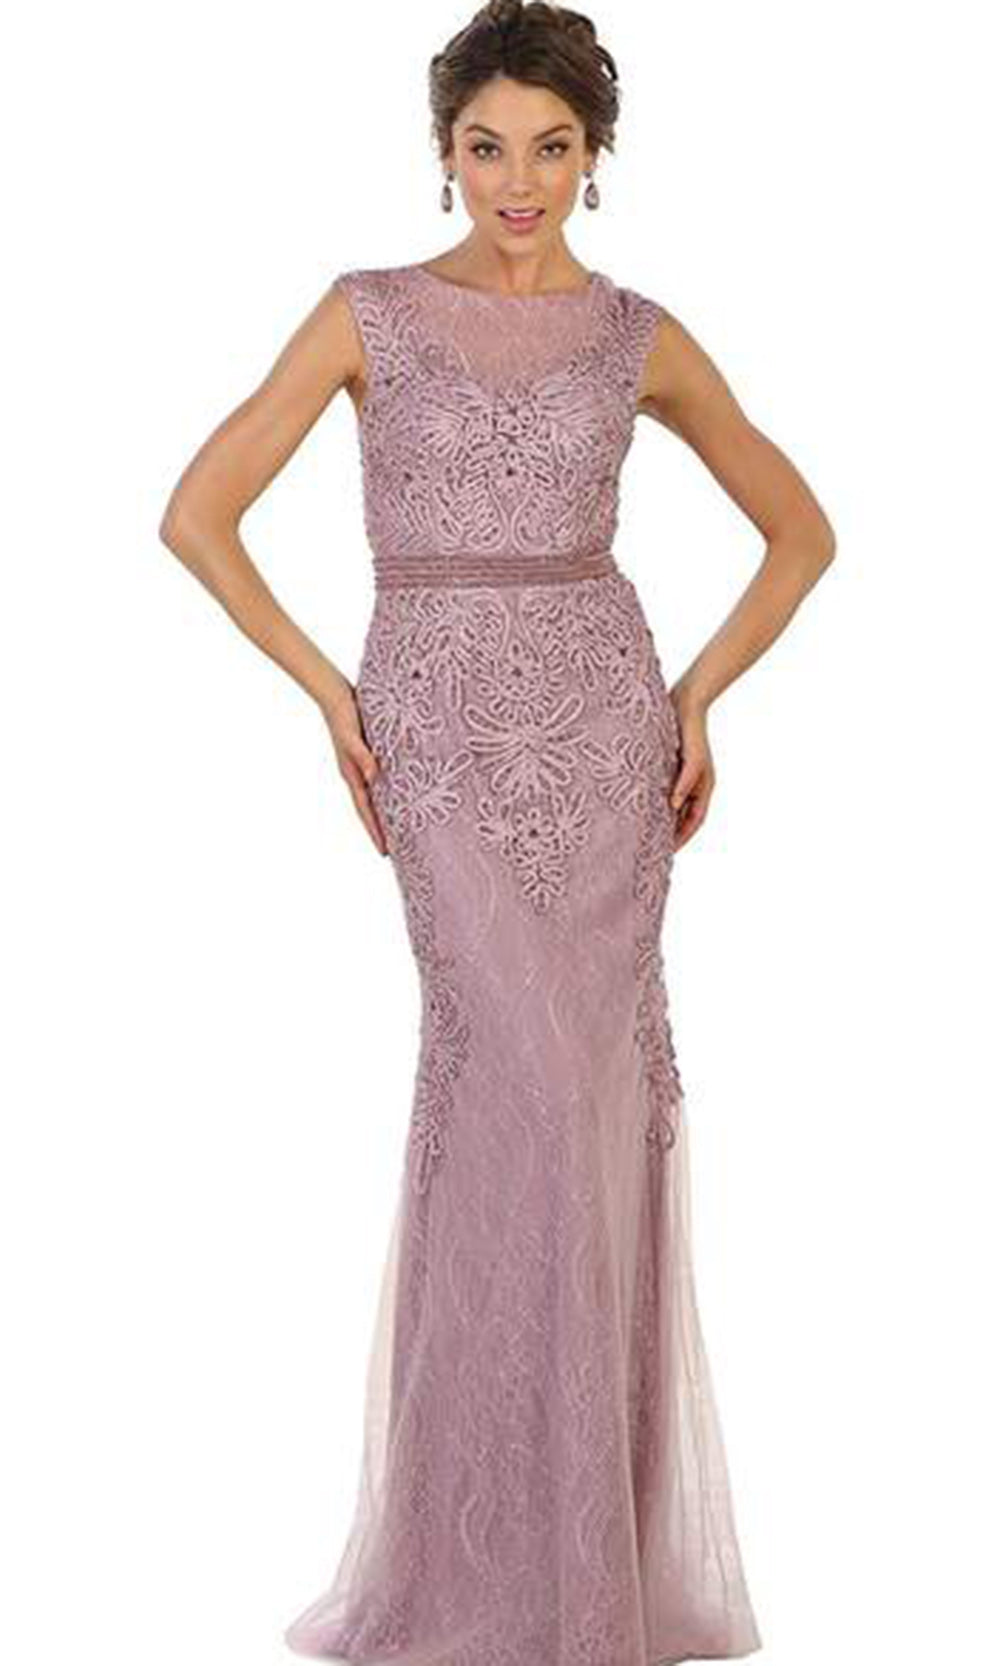 May Queen - Beaded Illusion Bateau Sheath Evening Gown RQ7524 - 1 Pc Mauve in Size 10 and 1 Pc Black in Size 14 Available CCSALE